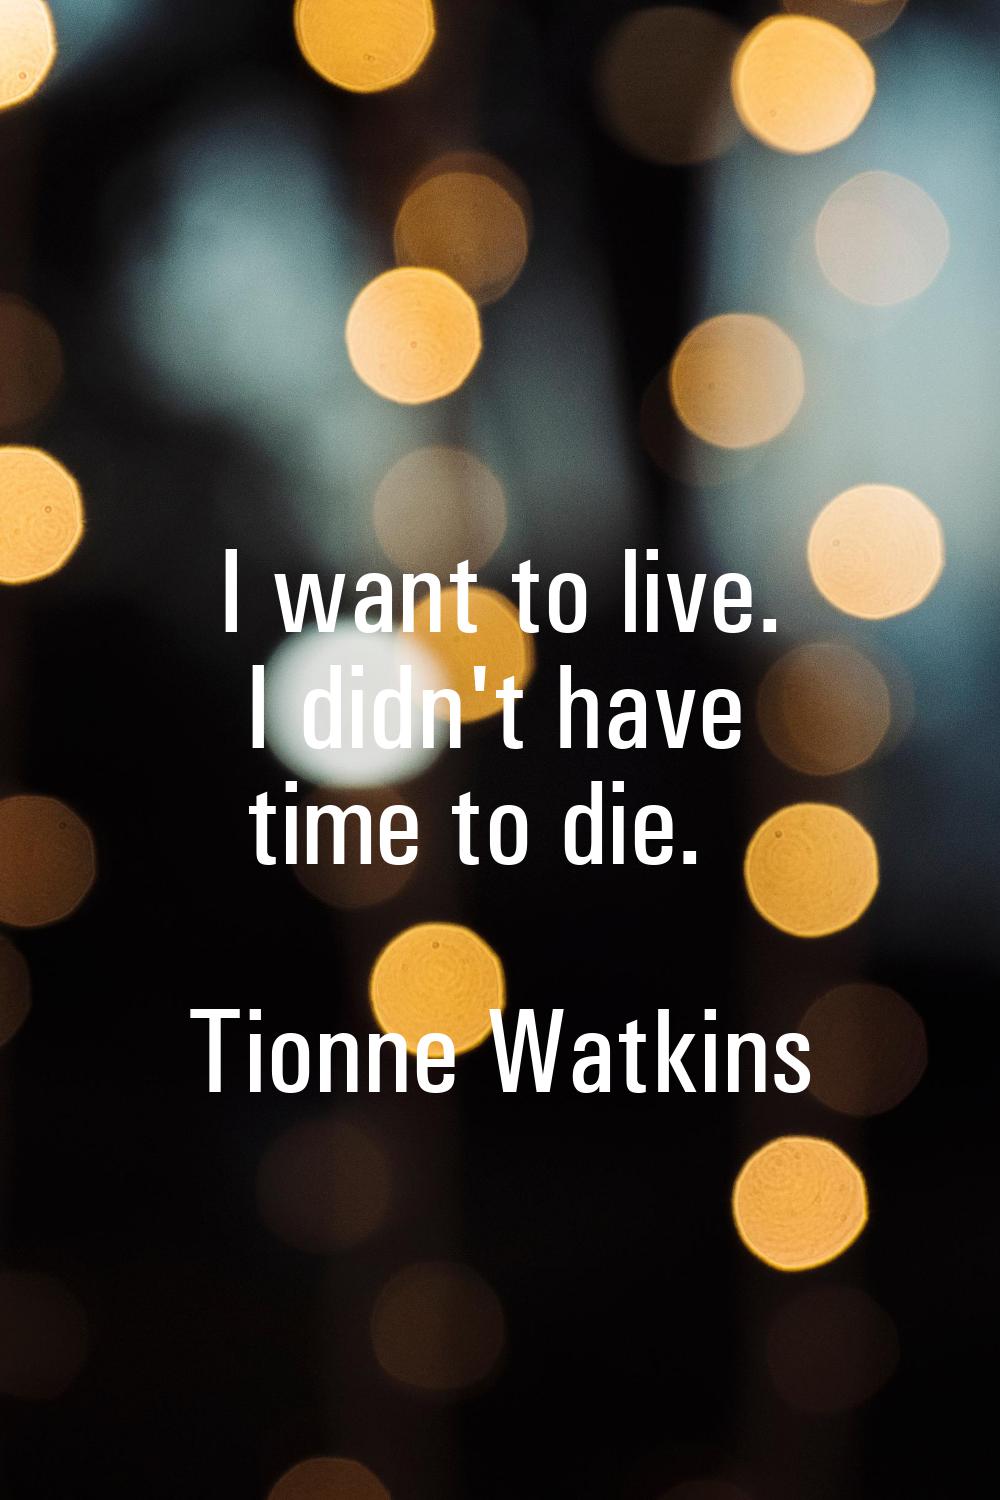 I want to live. I didn't have time to die.